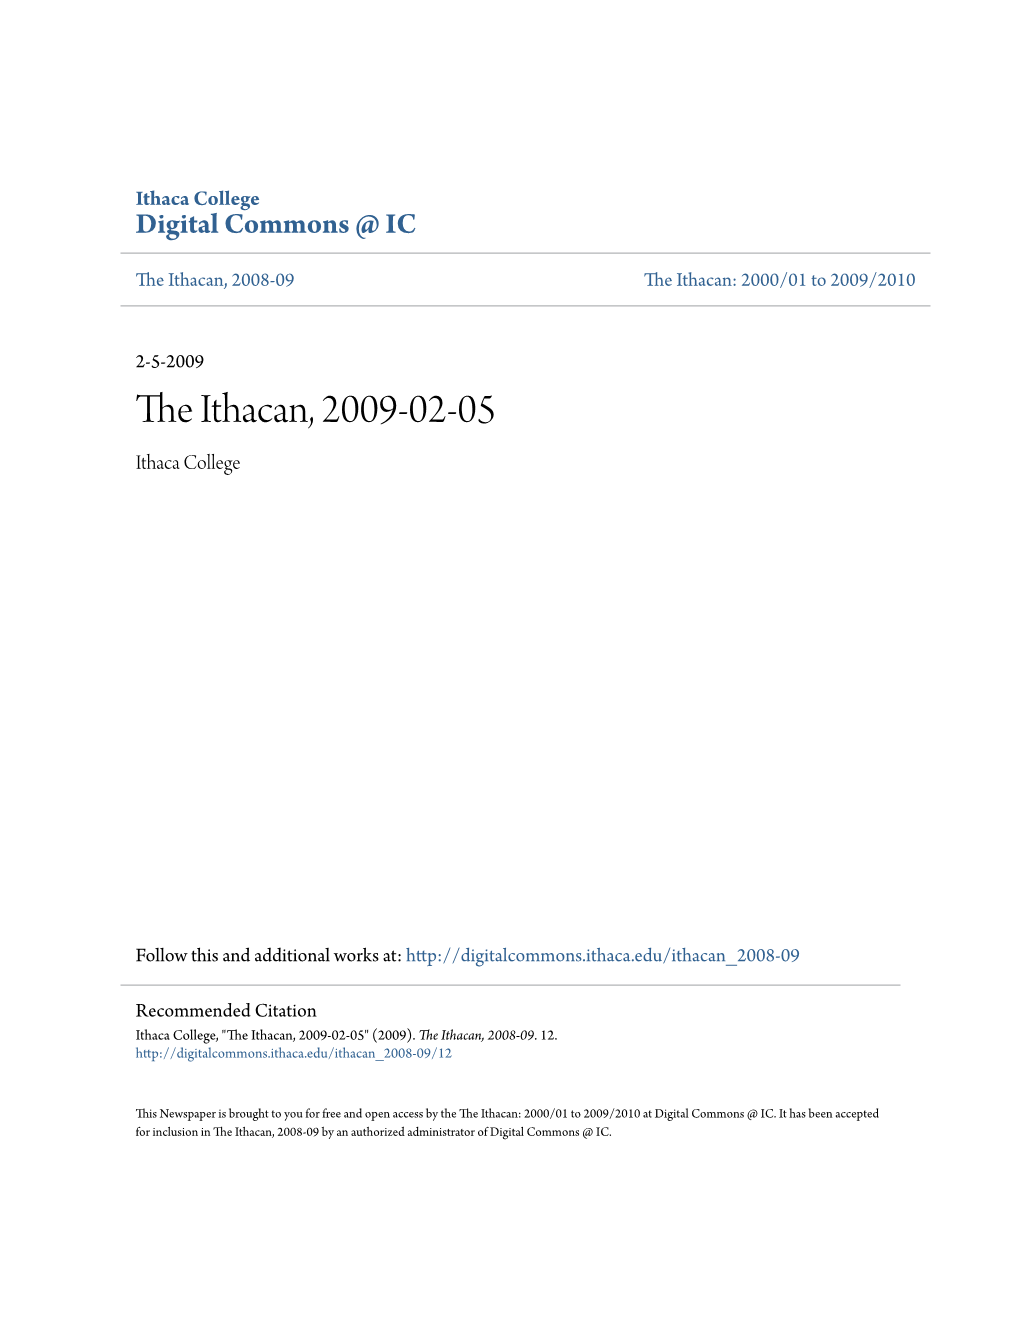 The Ithacan, 2009-02-05